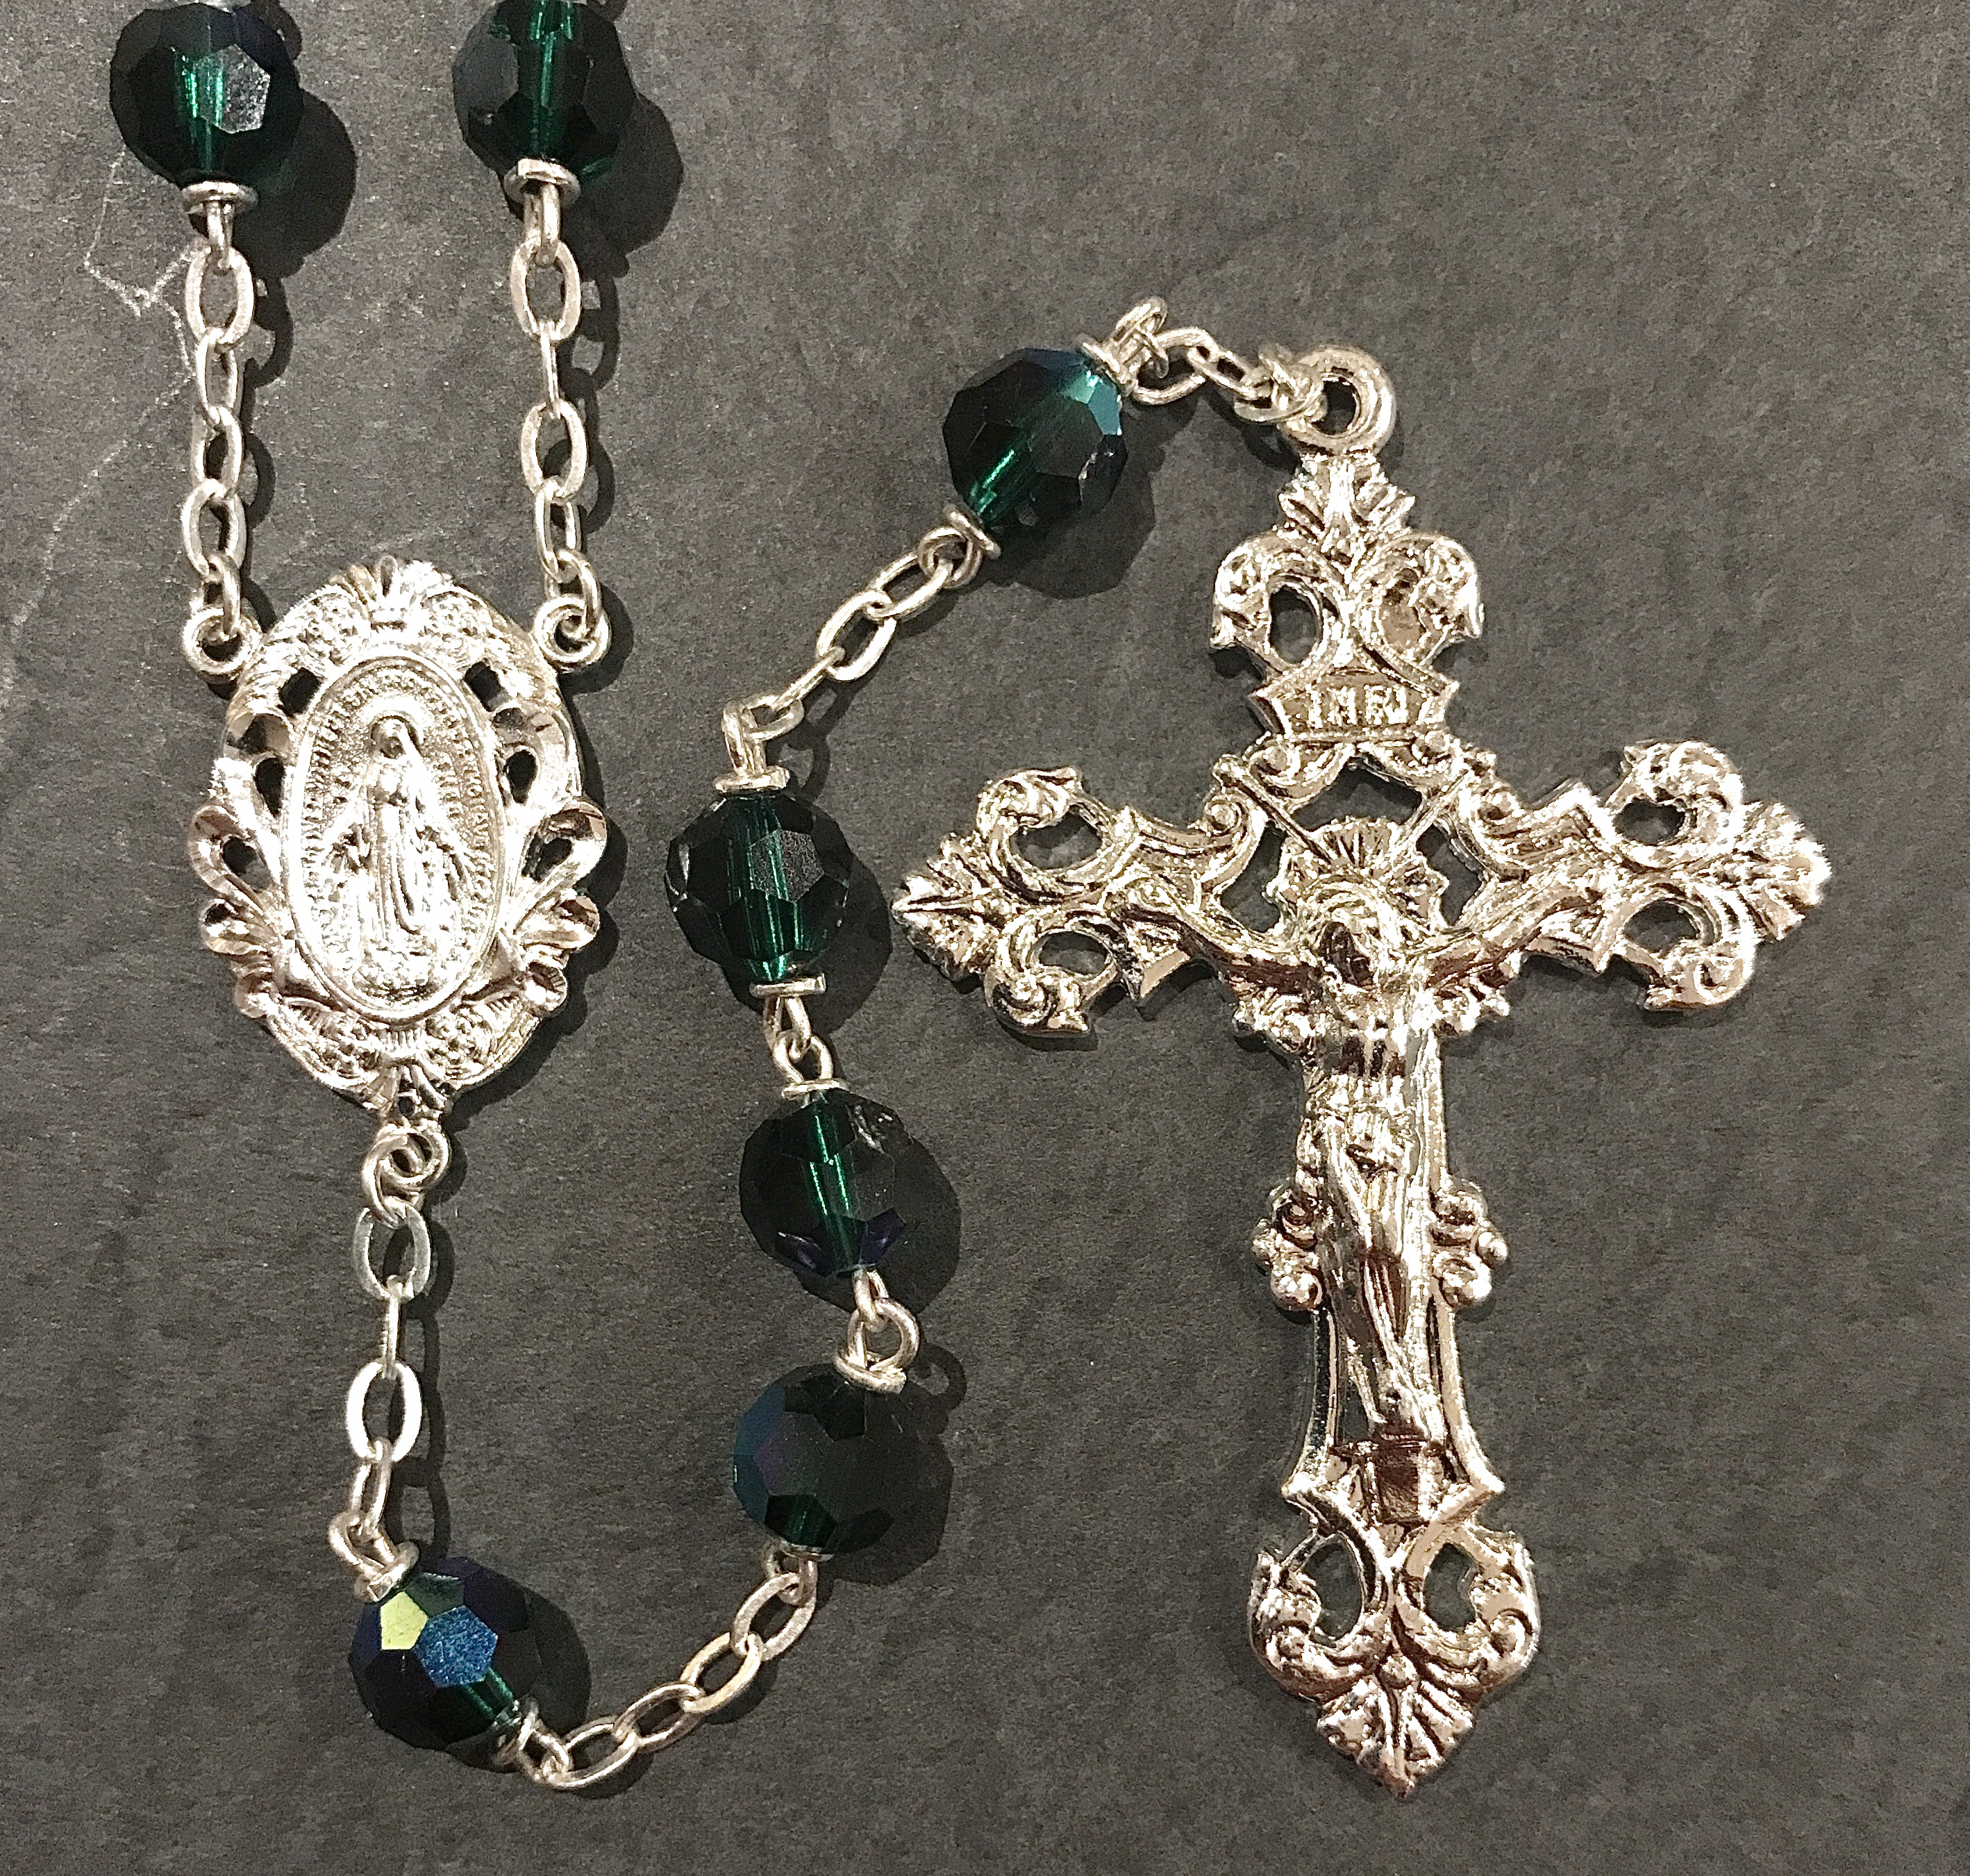 7mm EMERALD TIN CUT AB ROSARY WITH STERLING SILVER PLATED CRUCIFIX, CENTER, WIRE, CHAIN GIFT BOXED